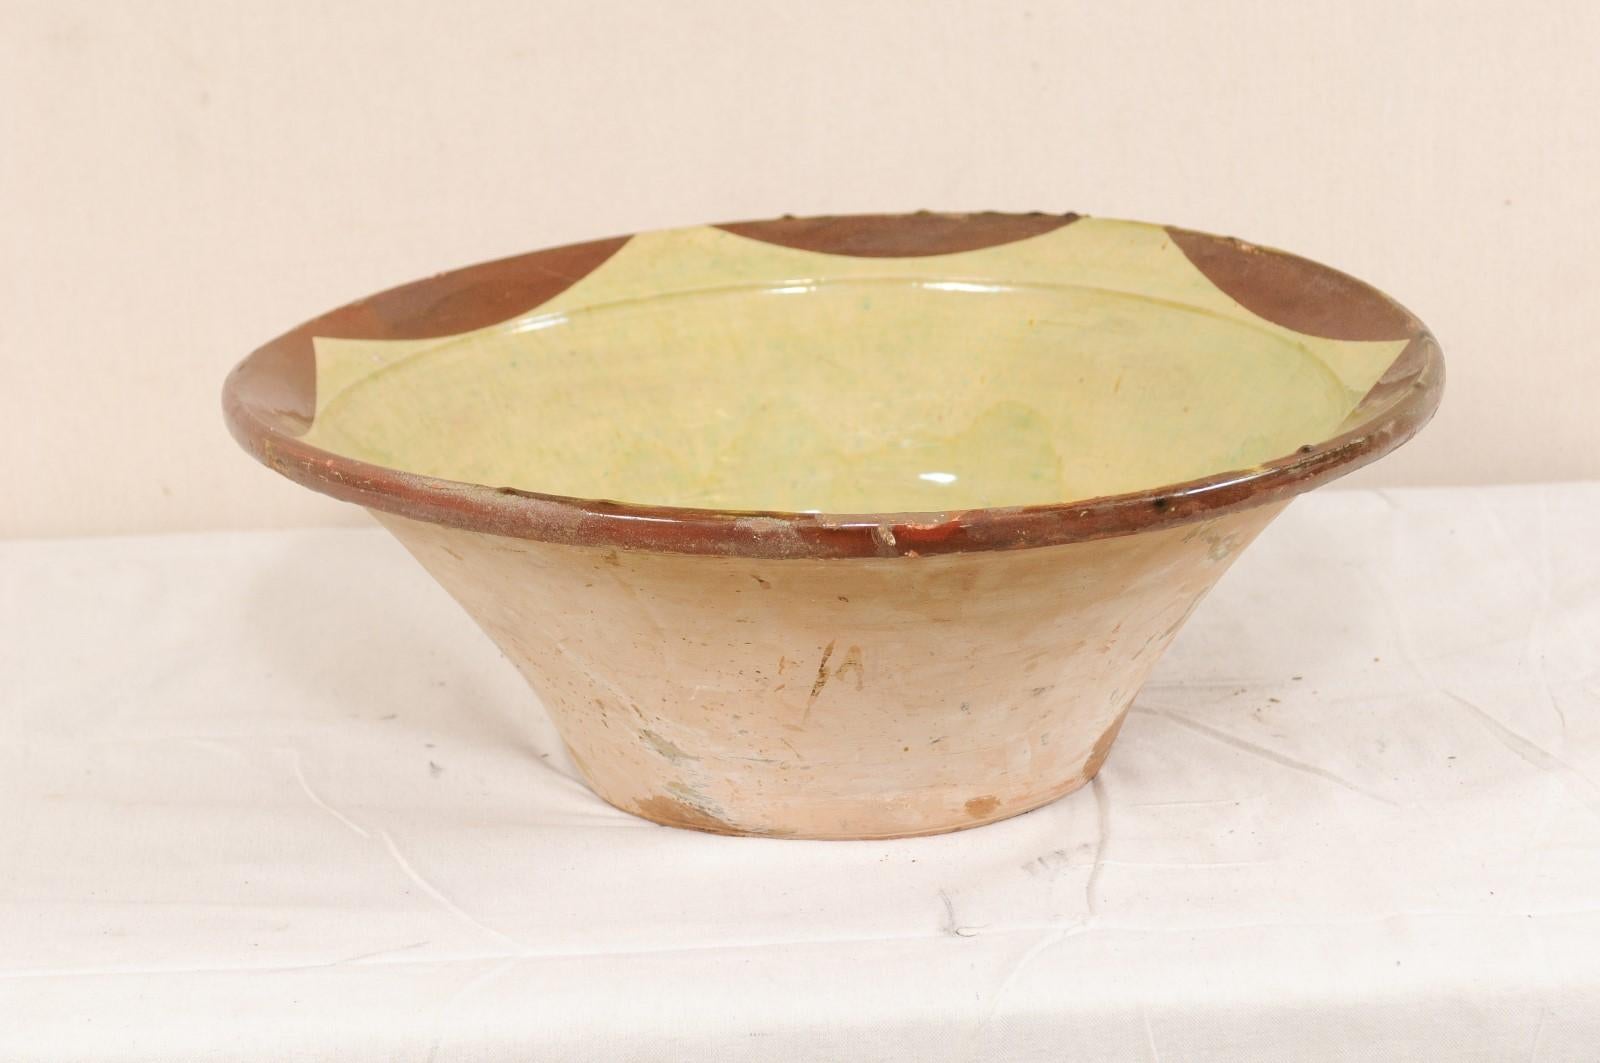 A Spanish terracotta bowl with pale green and brown accents from the early 20th century. This antique bowl from Spain is round in shape, with widest part being at the top lip, it gradually slopes inward towards the center, and rests upon a flat